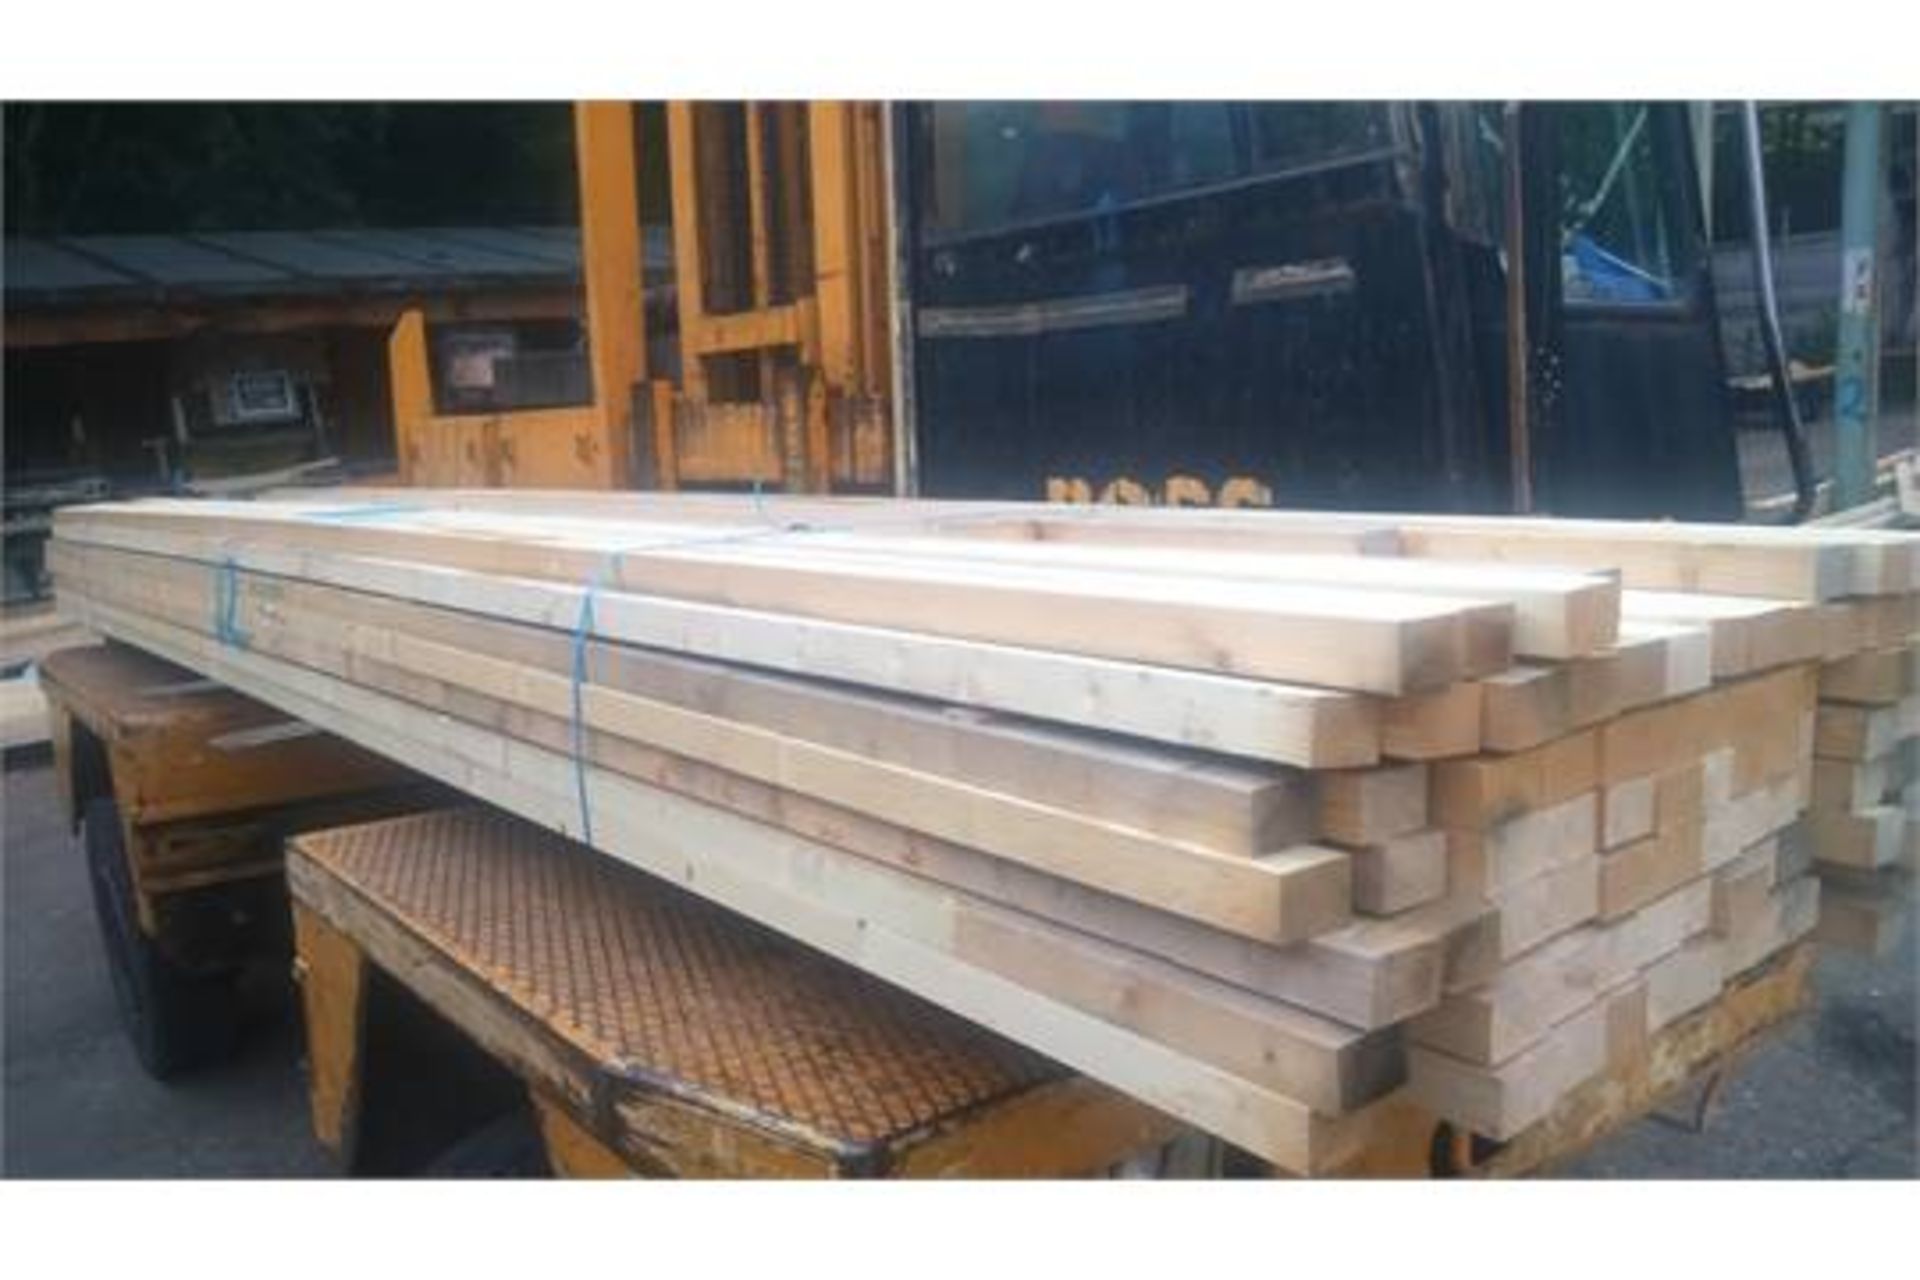 33 x Pieces of Unused TR26 Grade Timber - Size: 47mm x 97mm x 4.5m - Ref Lot 14 - CL151 -